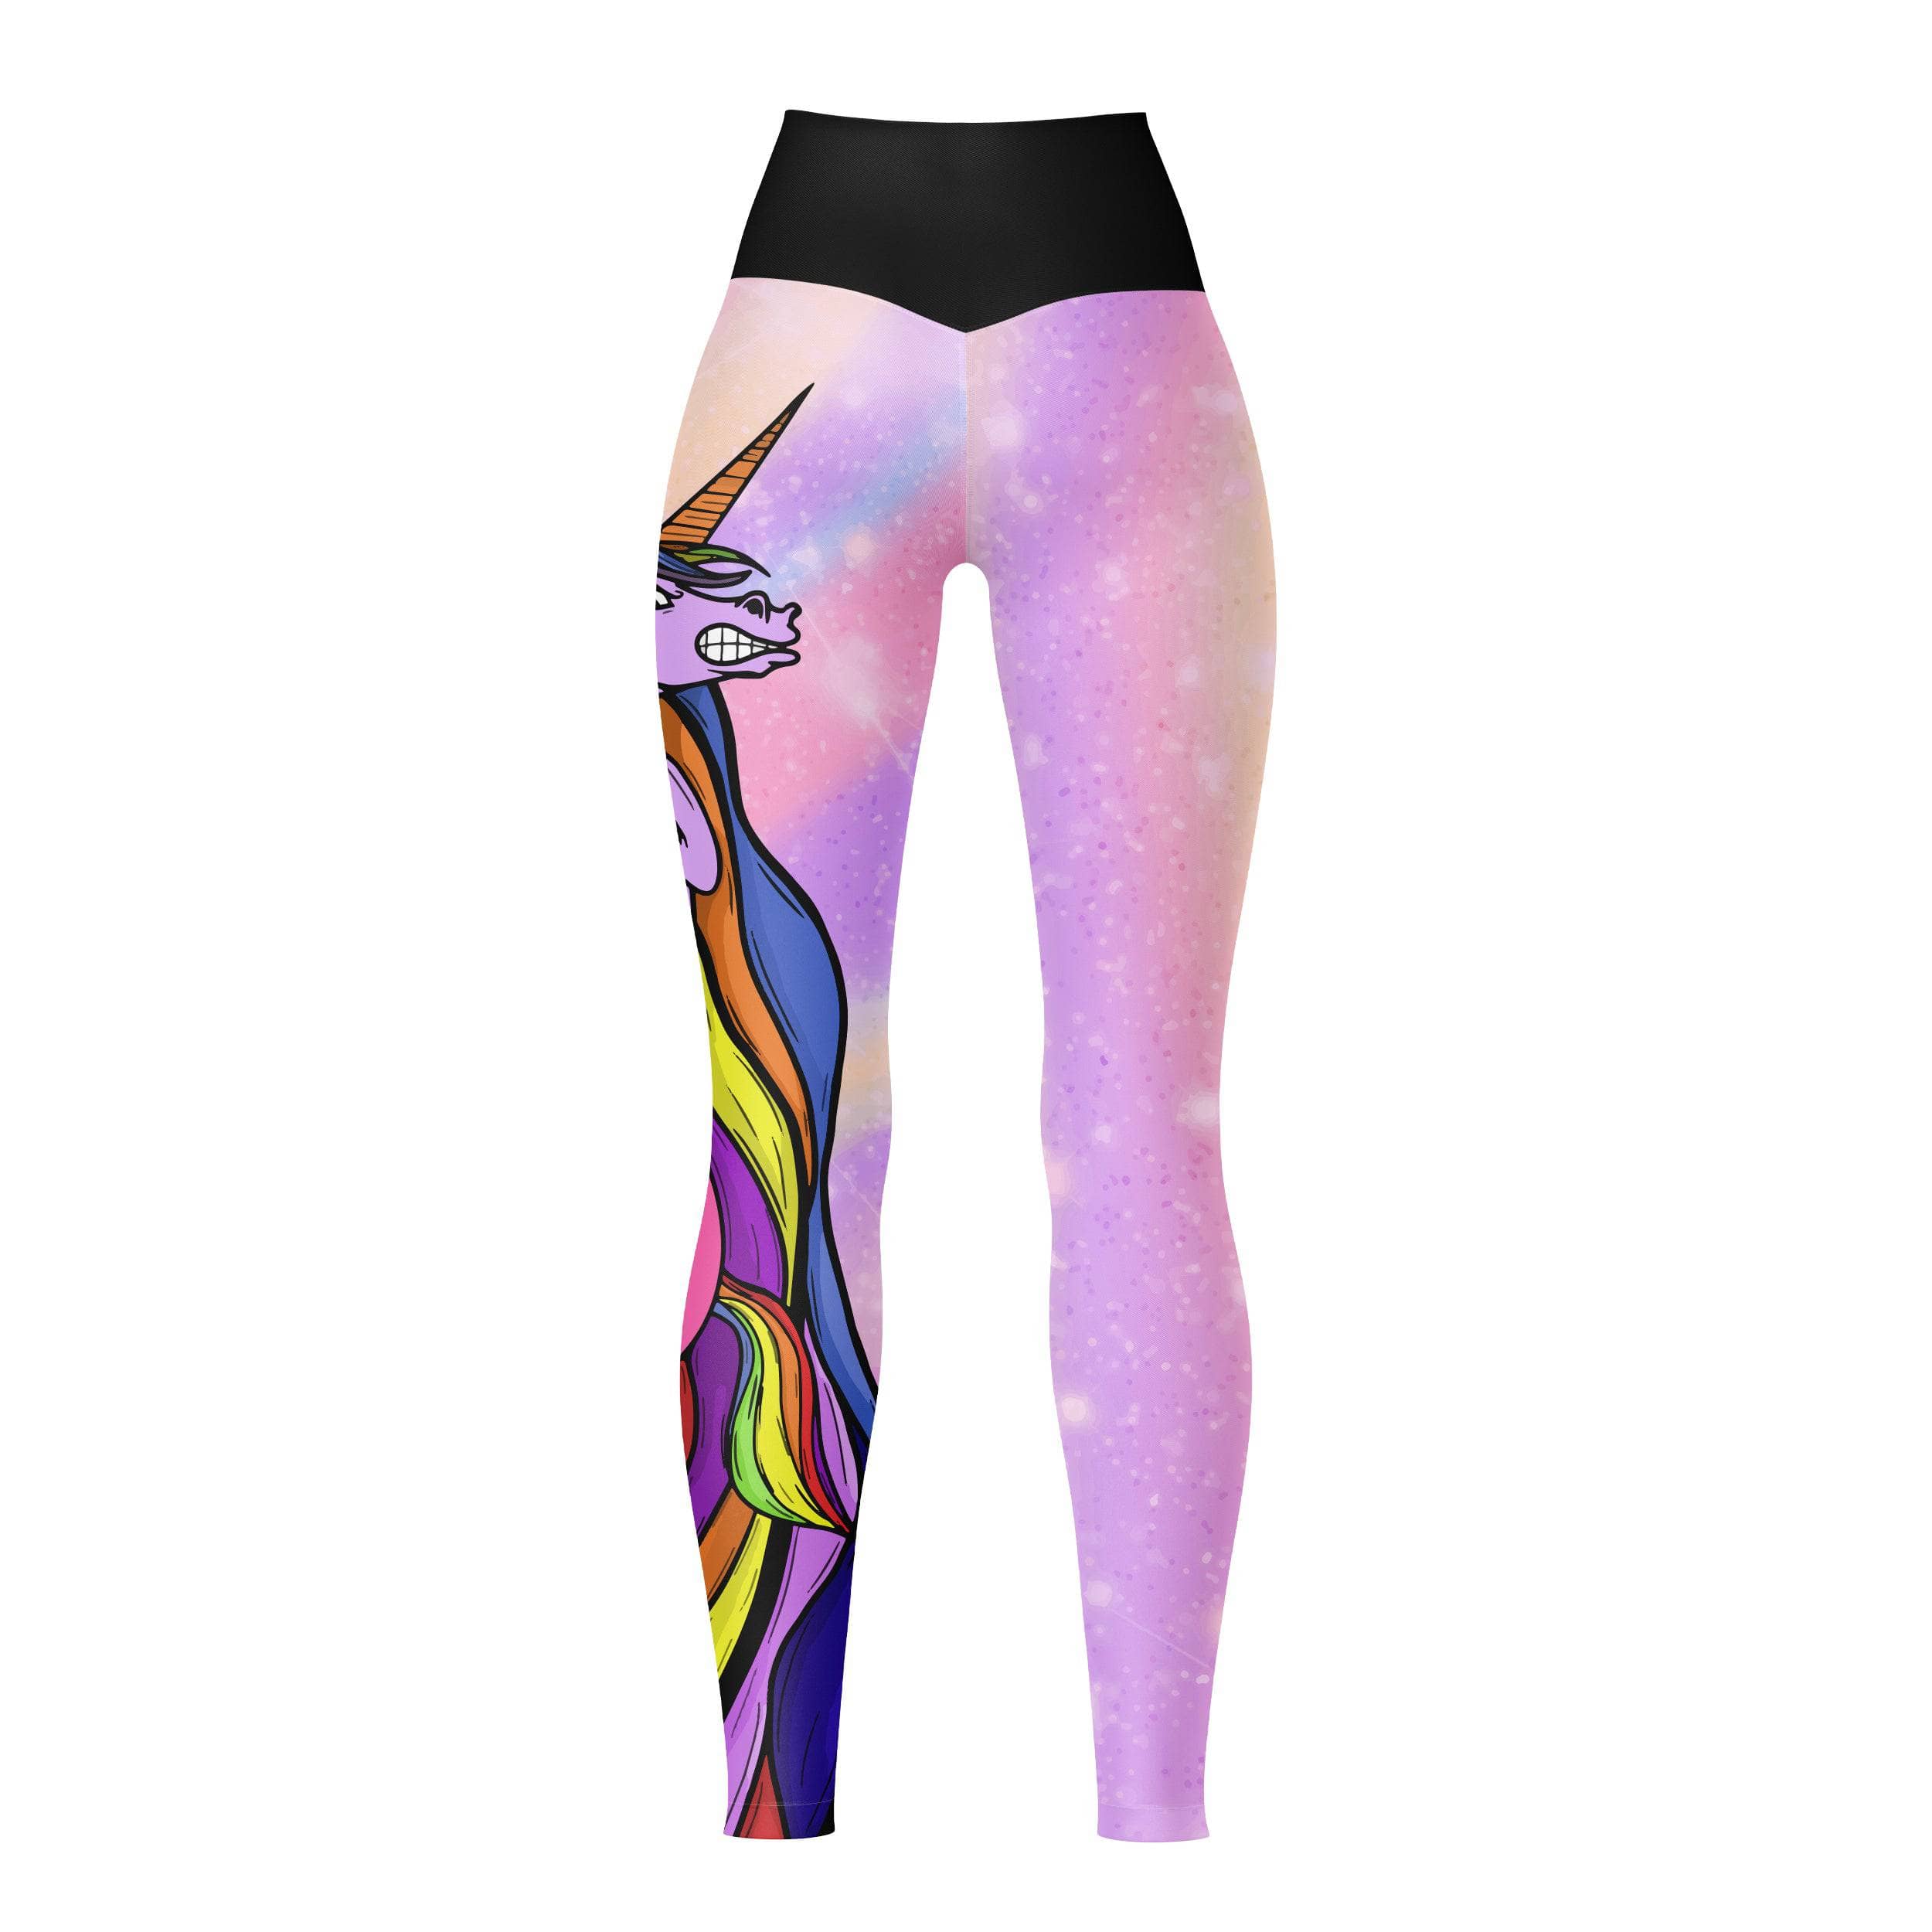 BJJ Spats on Sale Today, #1 Rated MMA Shop